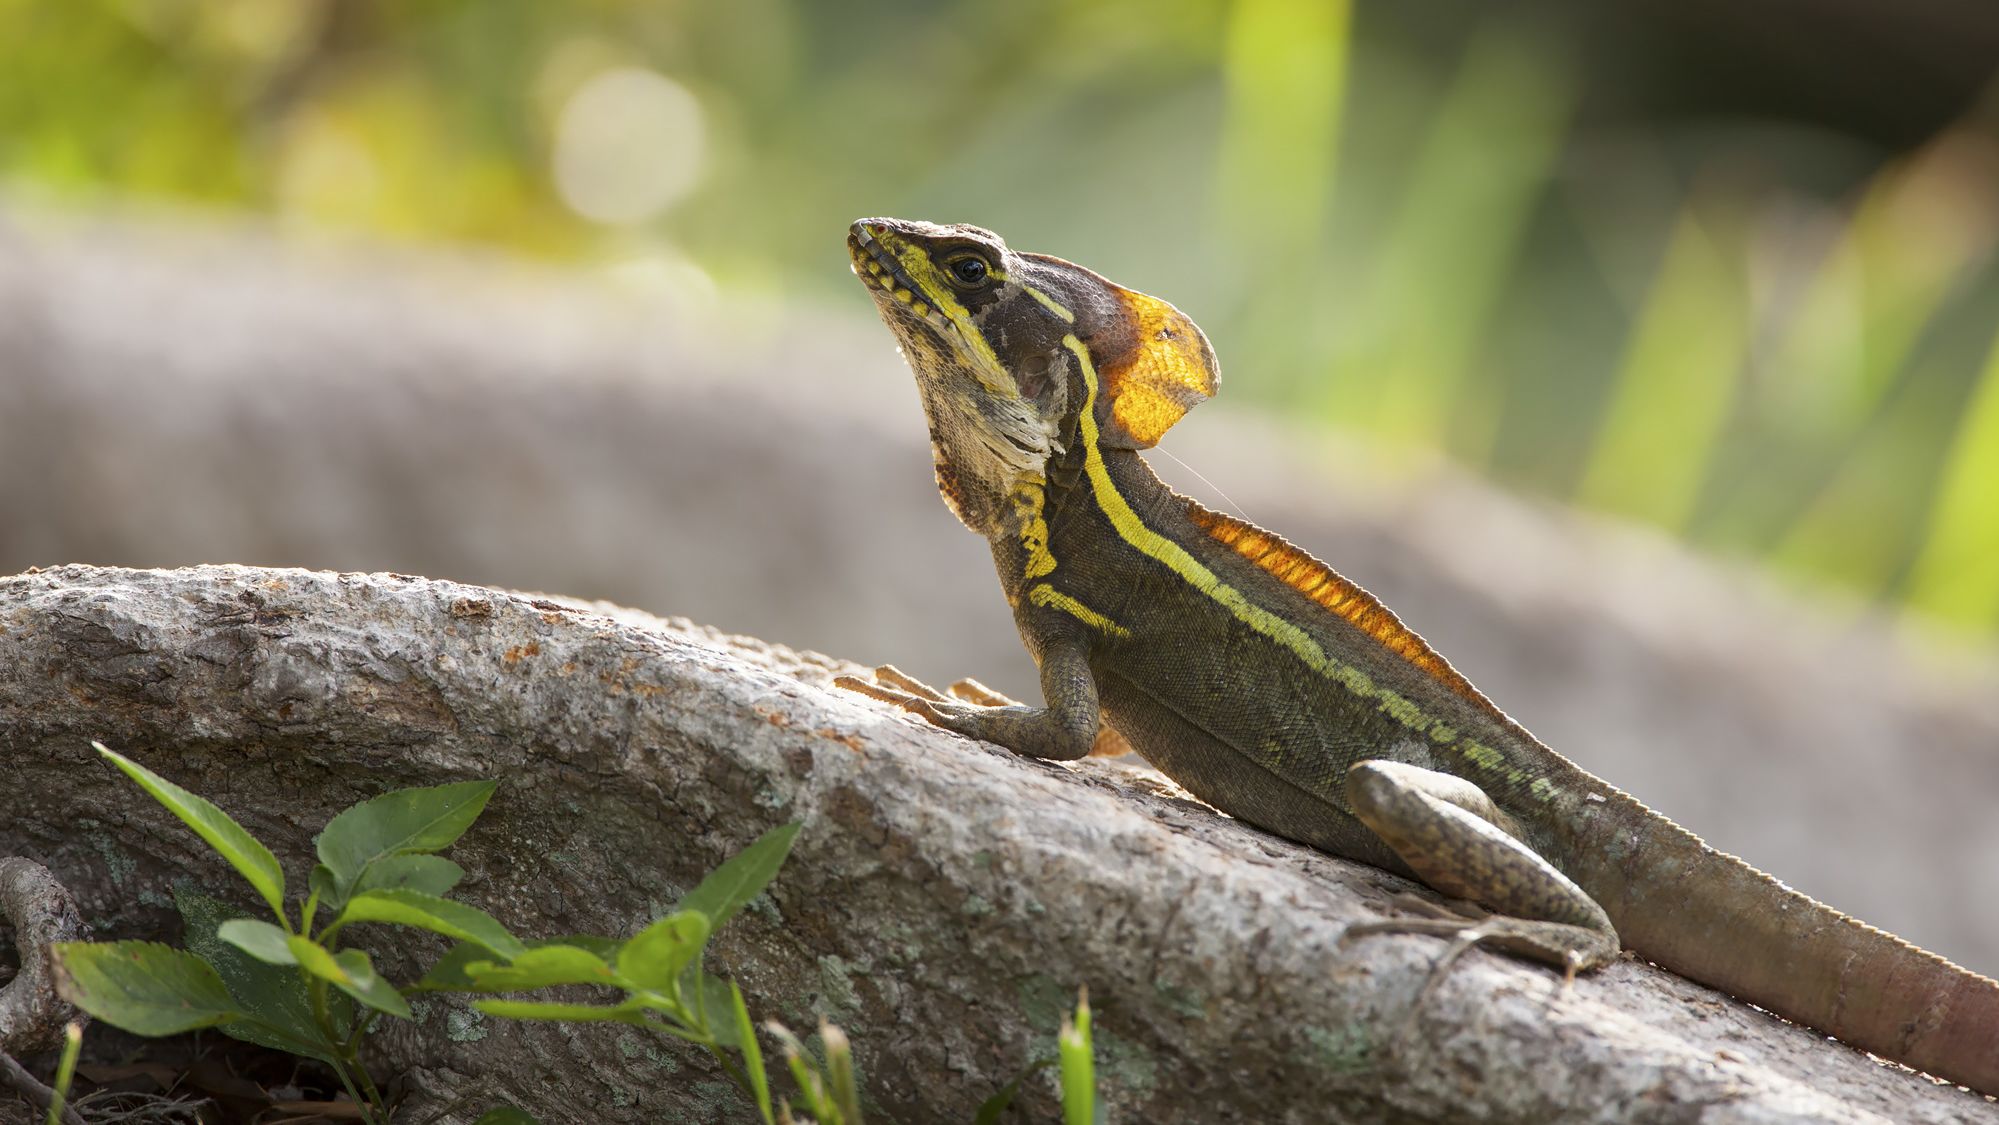 Central American brown basilisks (Basiliscus vittatus) are among the members of a lizard community that converged on a lower temperature tolerance after a cold snap in Miami.